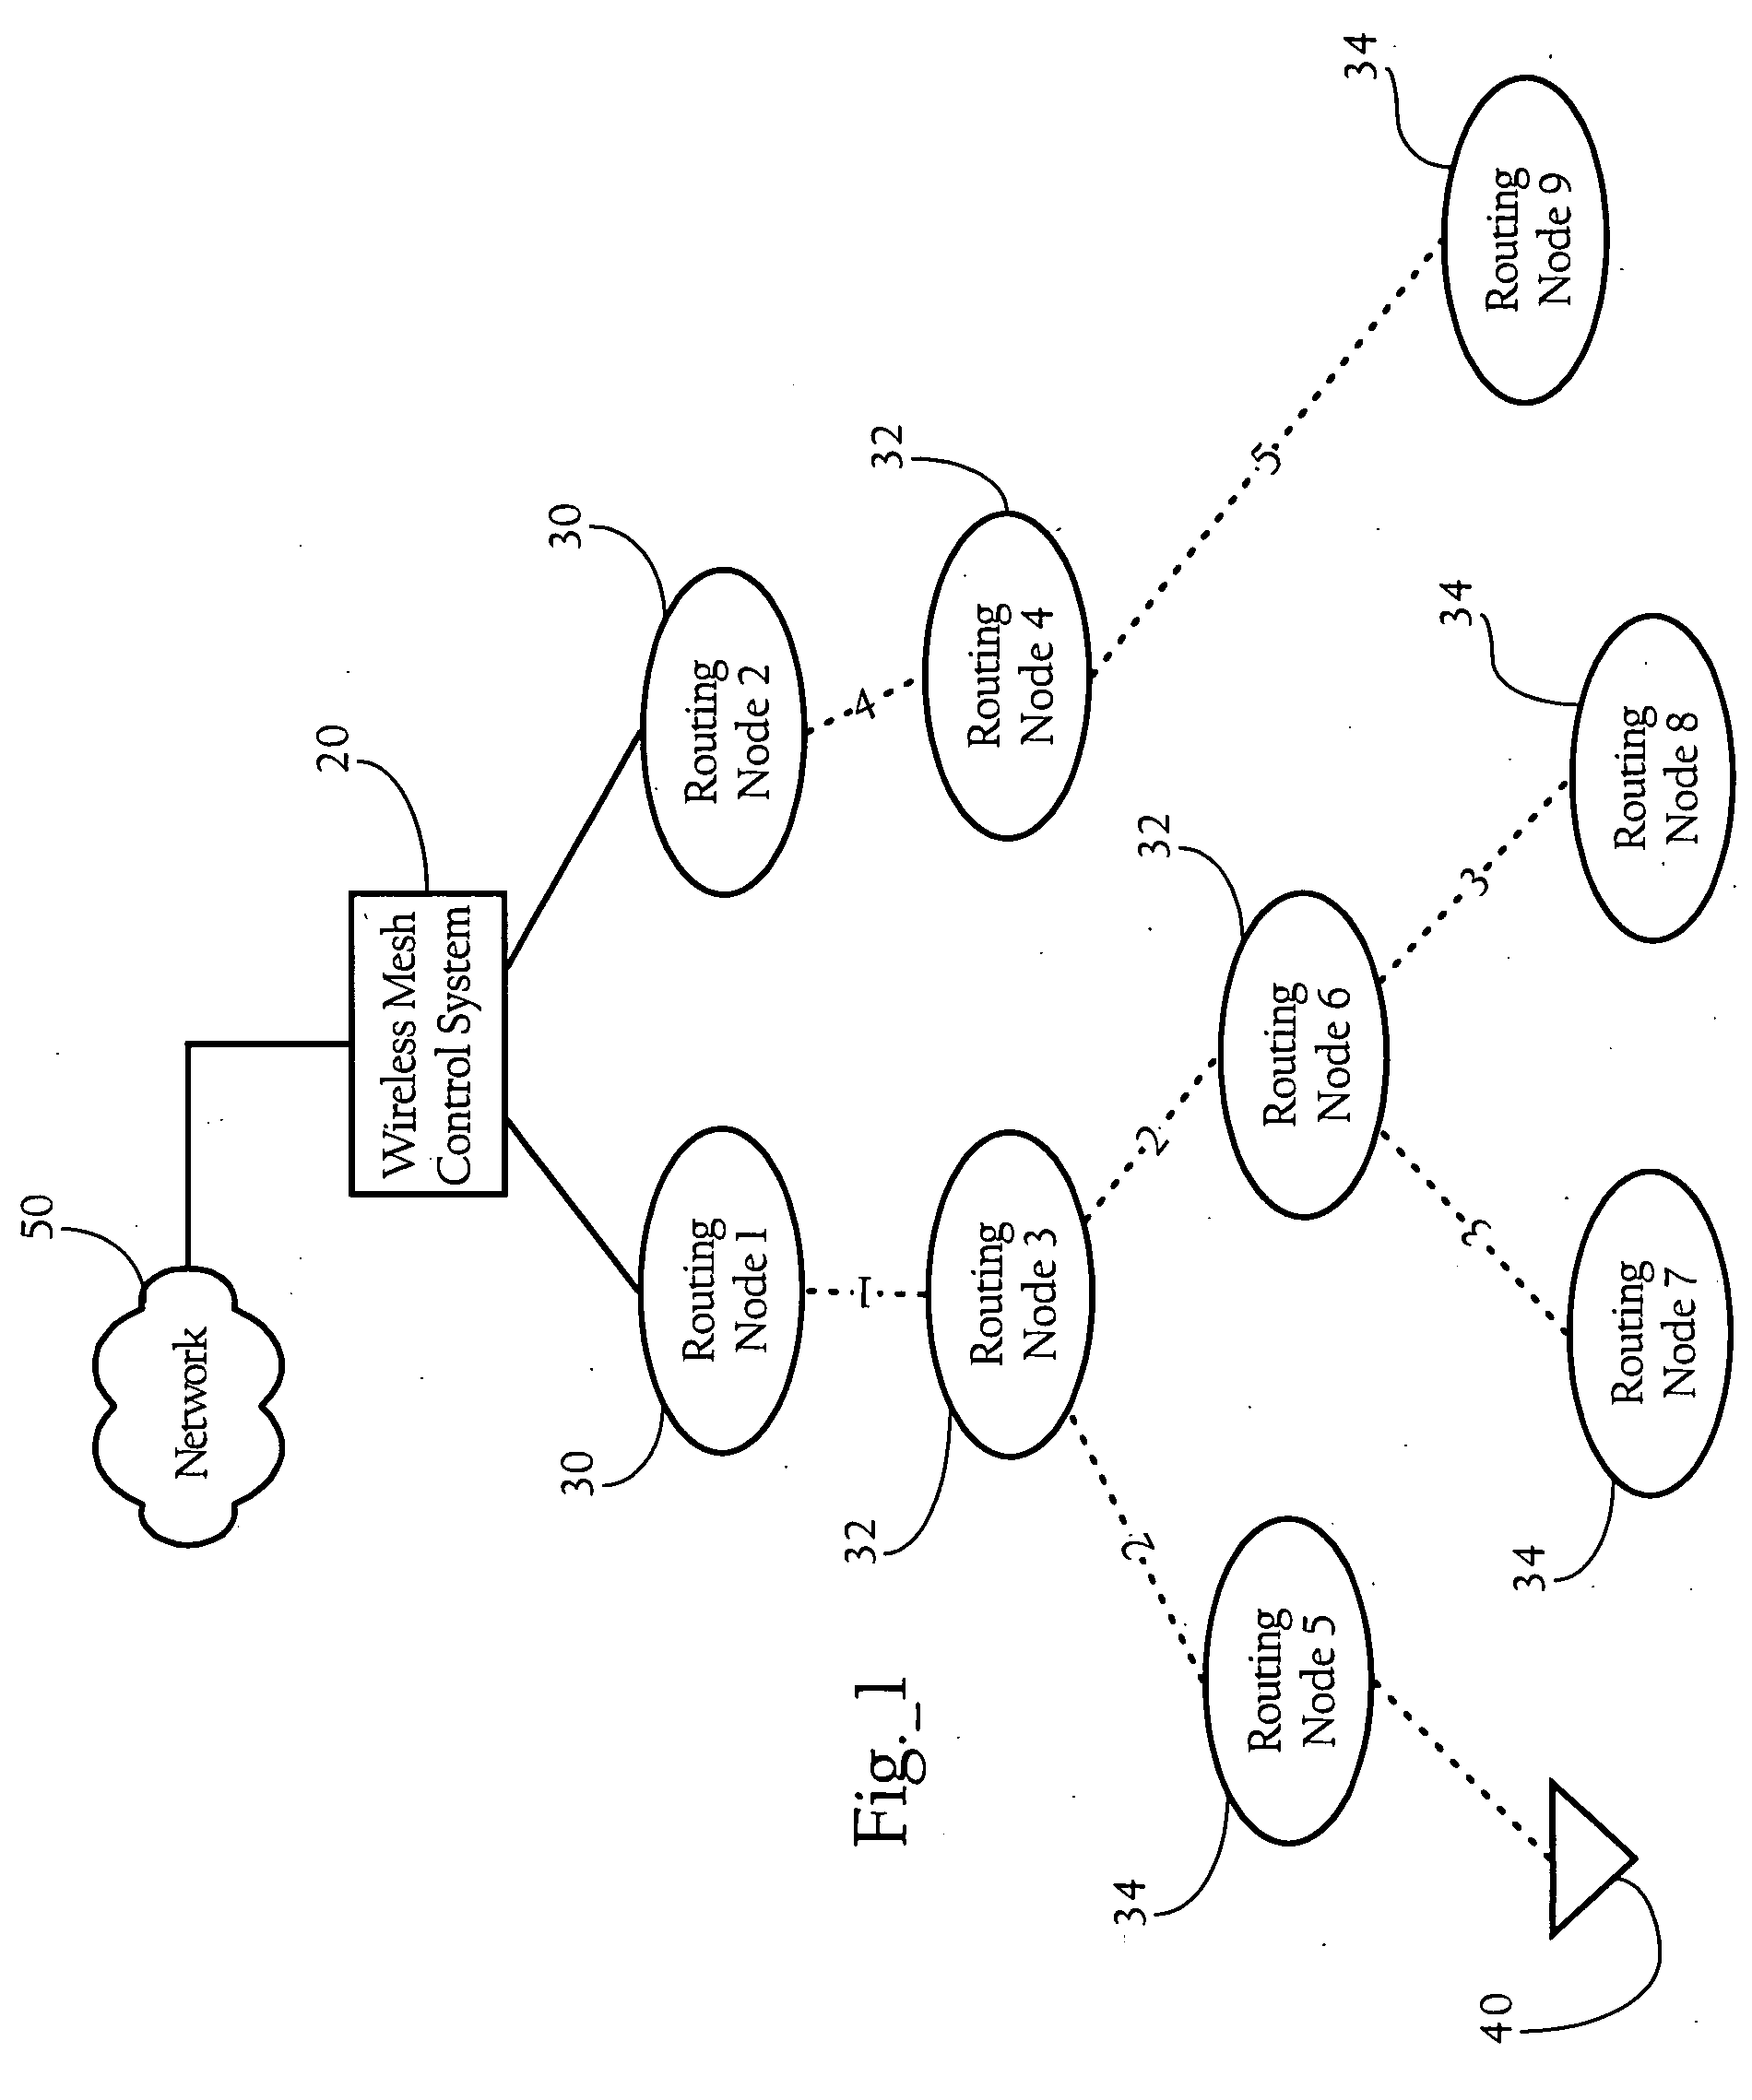 Cross-layer design techniques for interference-aware routing configuration in wireless mesh networks